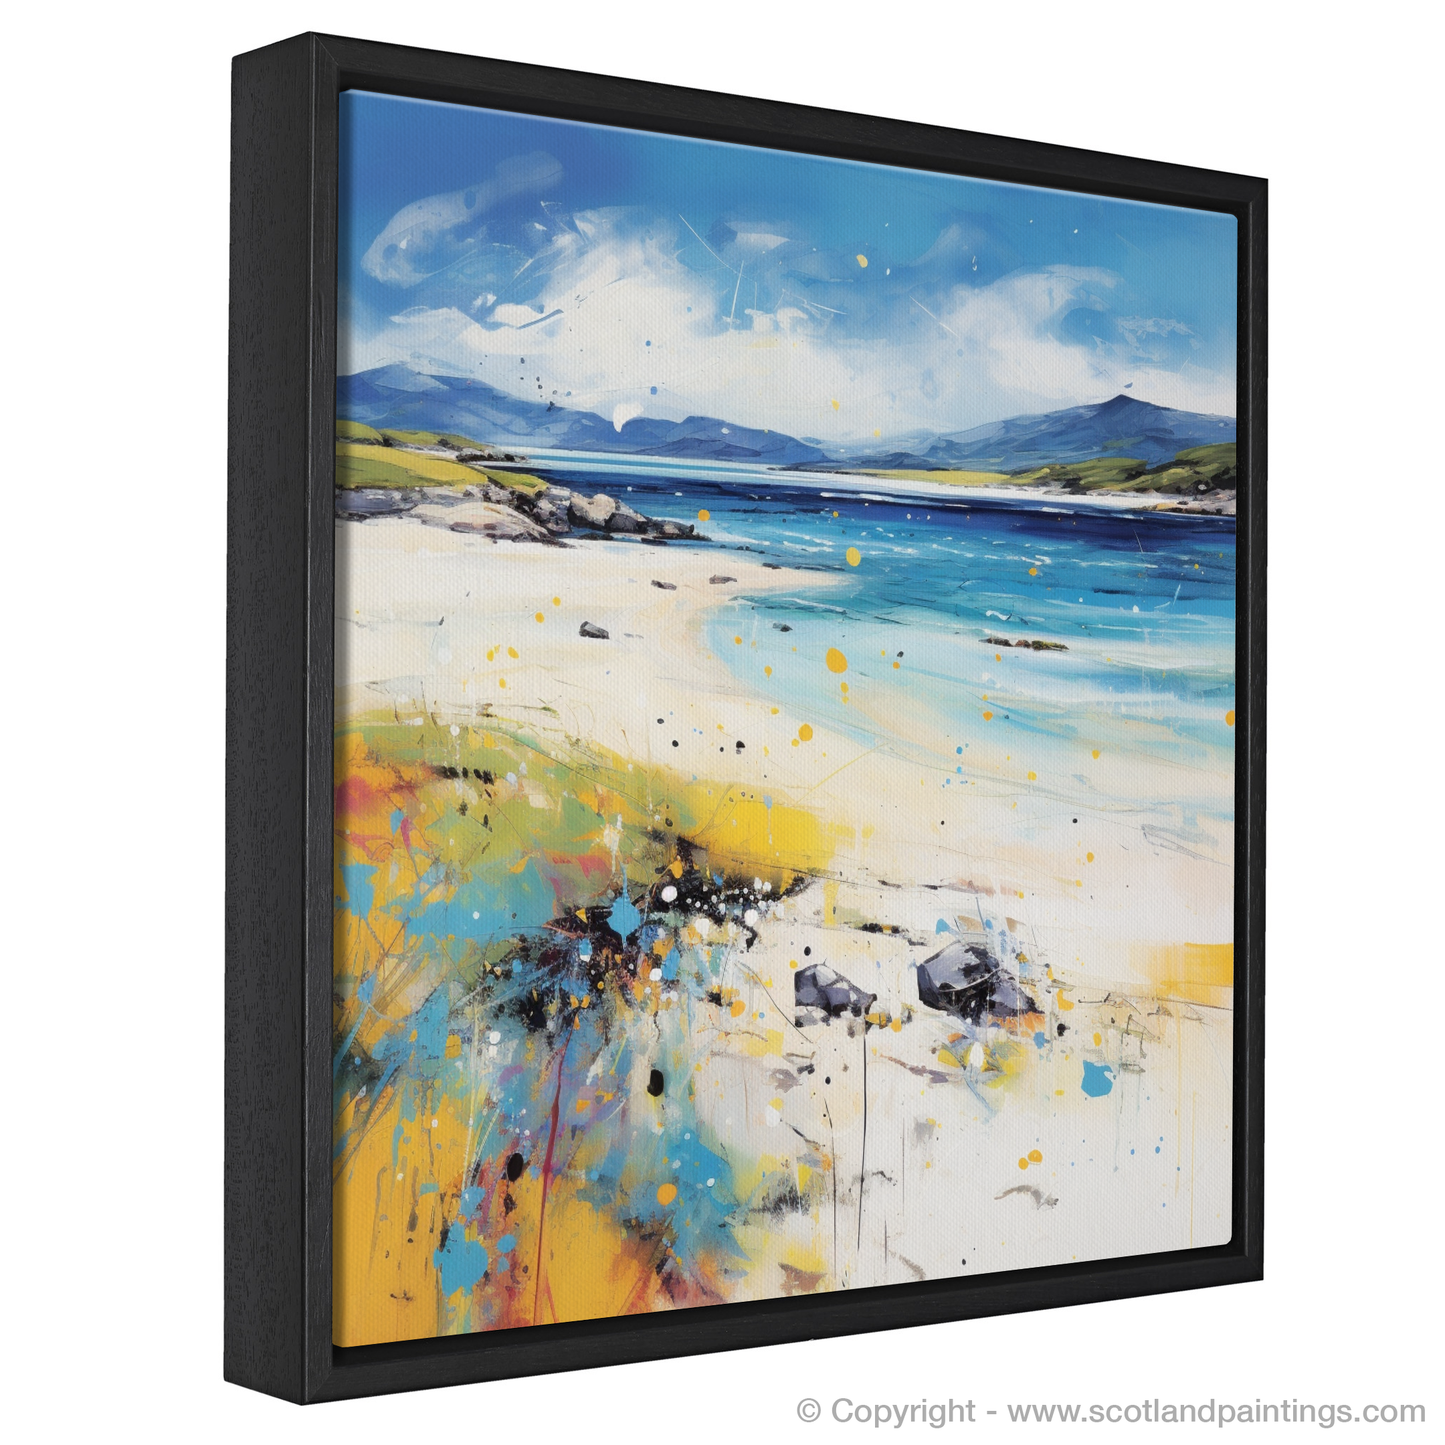 Painting and Art Print of Scarista Beach, Isle of Harris in summer entitled "Summer Breeze at Scarista Beach".